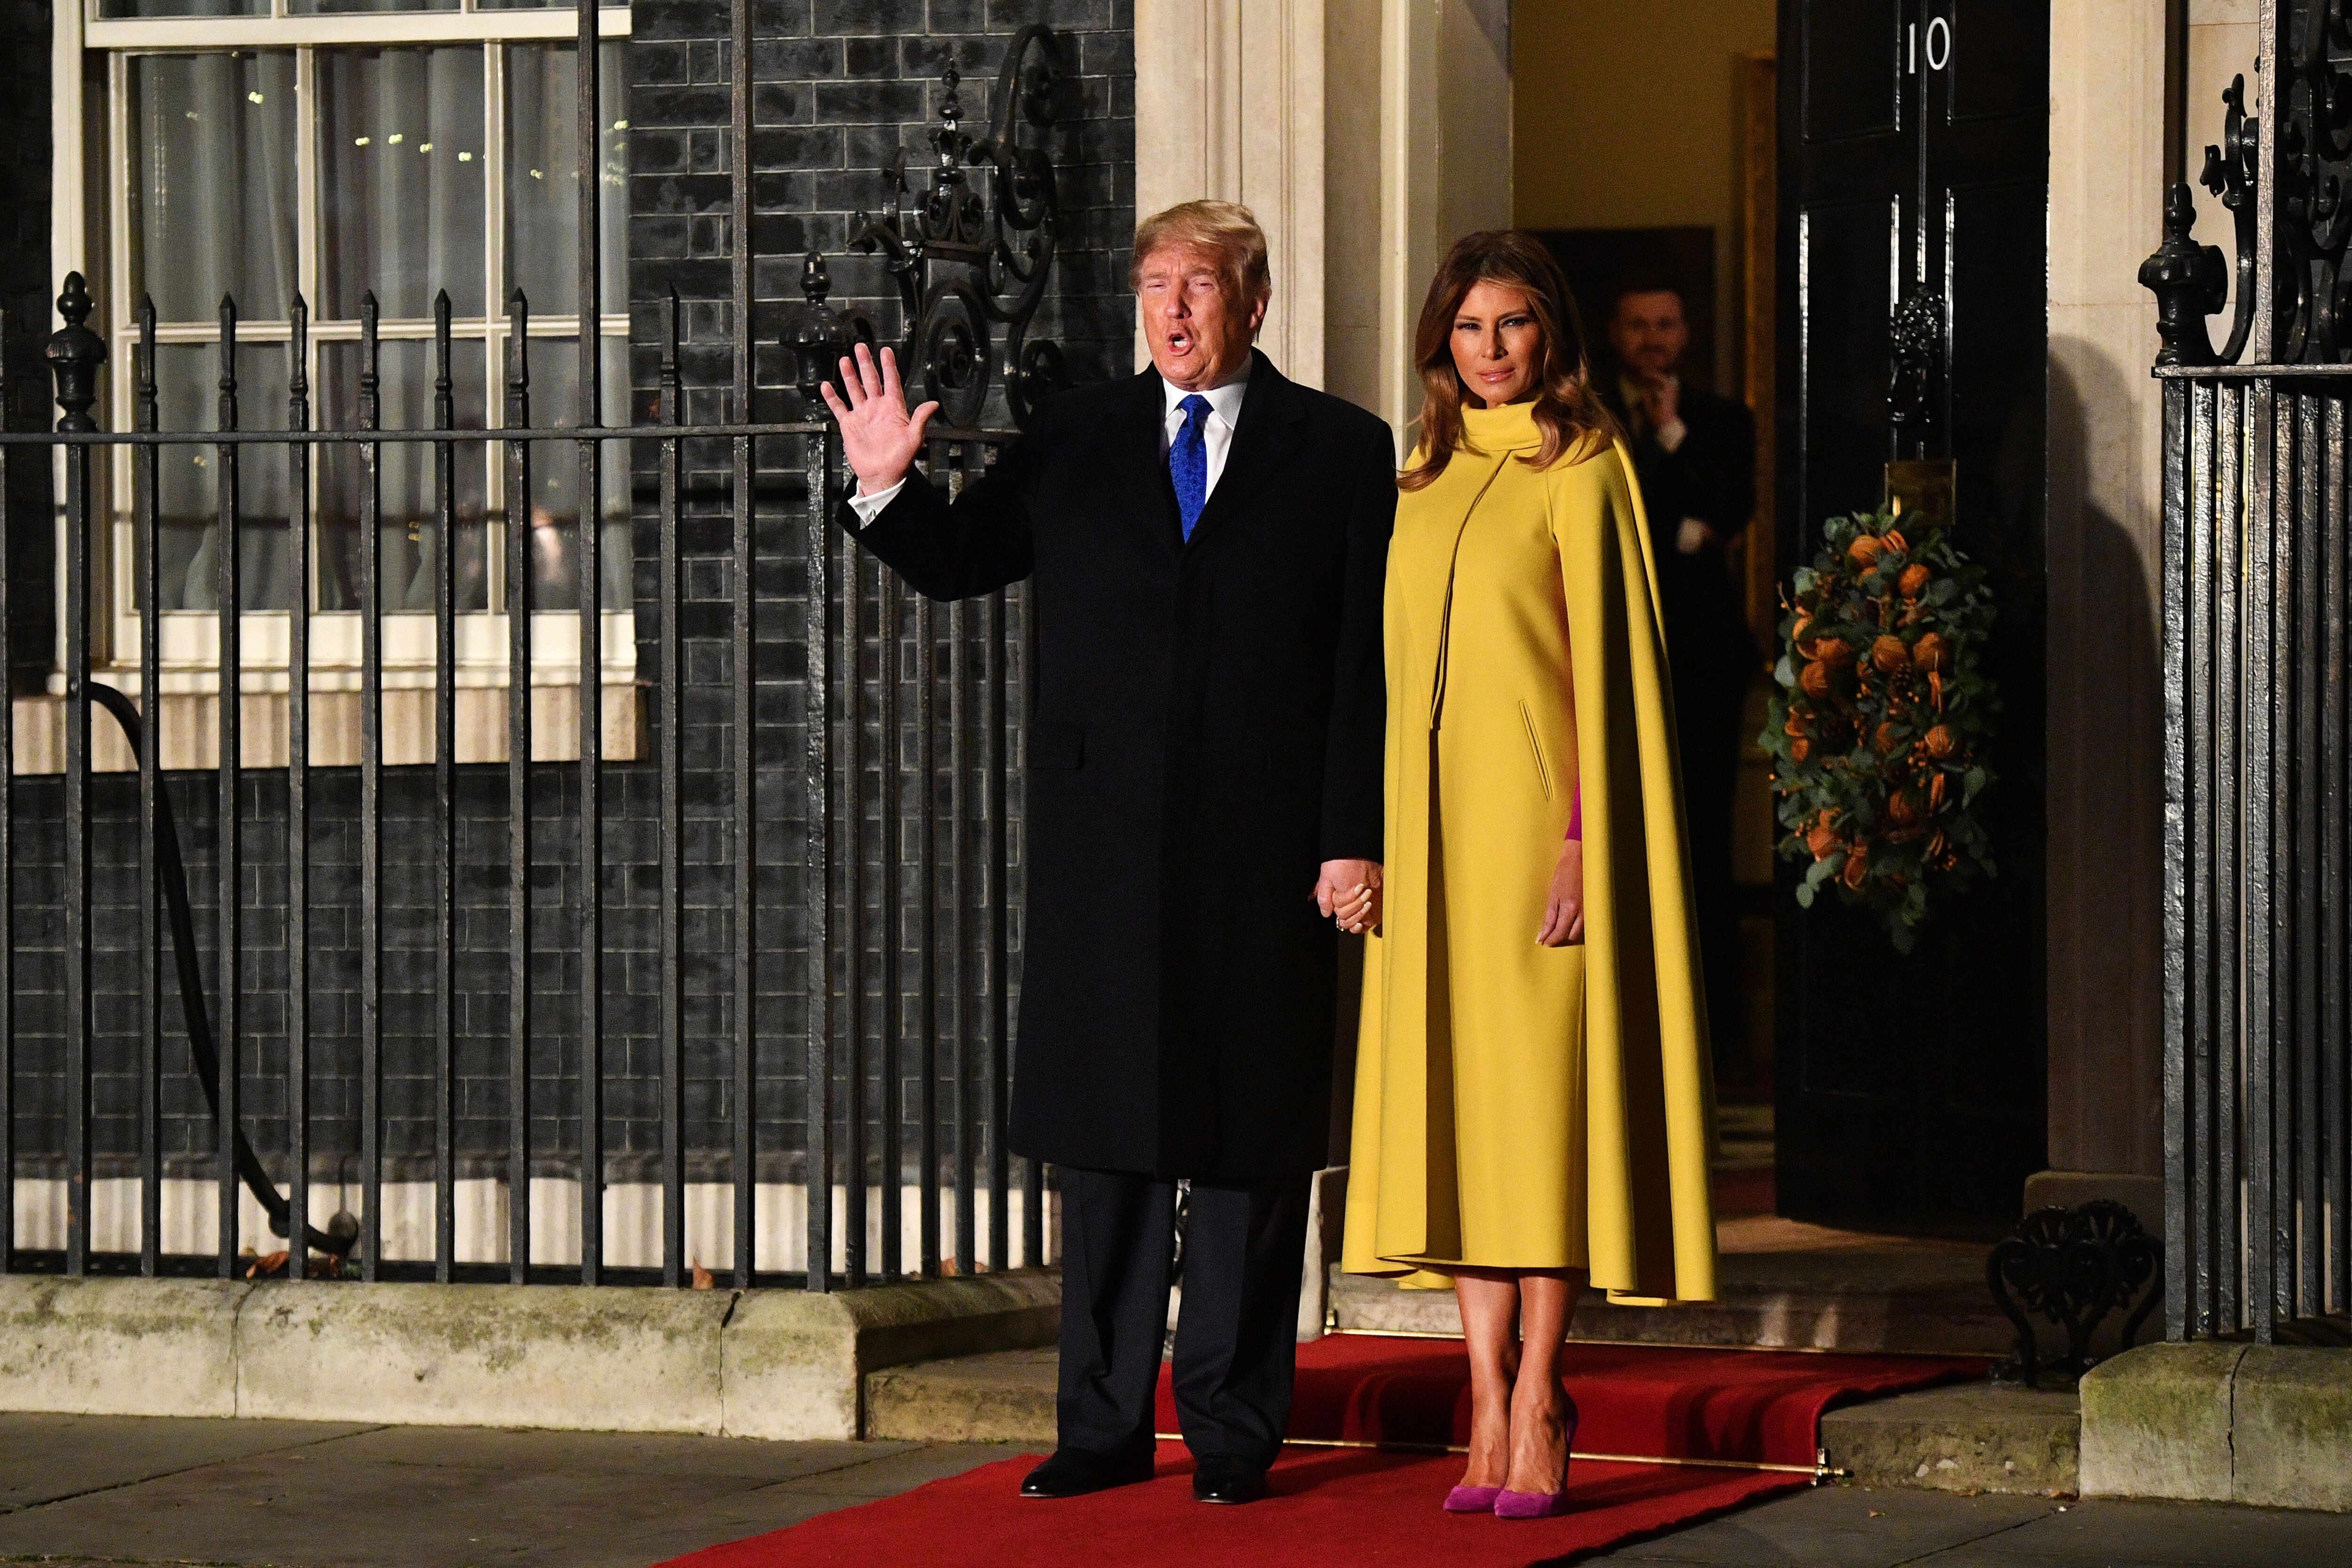 US President Donald Trump and First Lady Melania Trump arrive at number 10 Downing Street for a reception on December 3, 2019 in London, England. France and the UK signed the Treaty of Dunkirk in 1947 in the aftermath of WW2 cementing a mutual alliance in the event of an attack by Germany or the Soviet Union | Photo: Getty Images